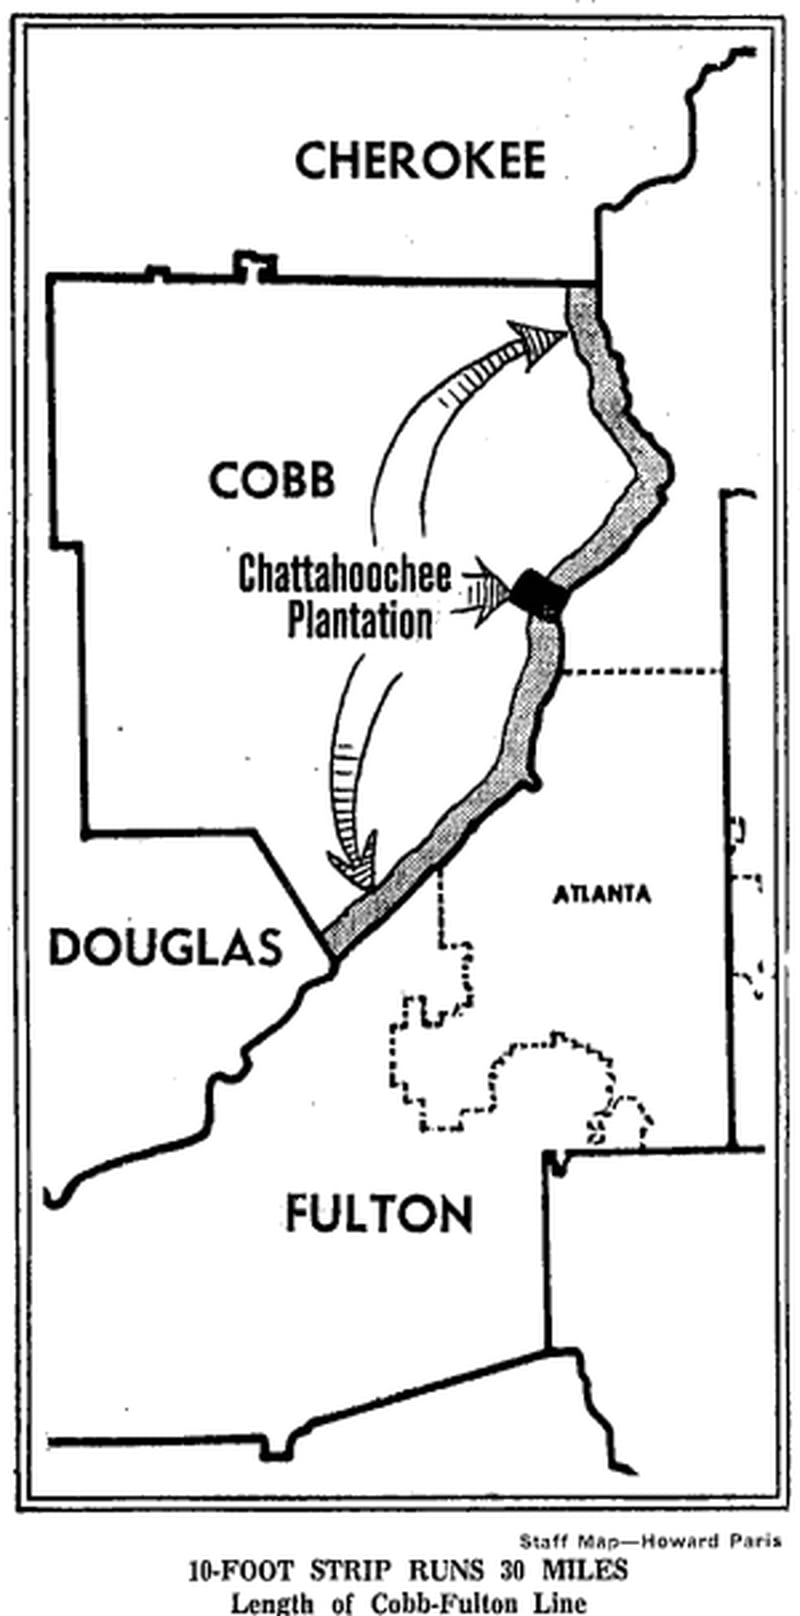 A map from the AJC's archives of Chattahoochee Plantation.